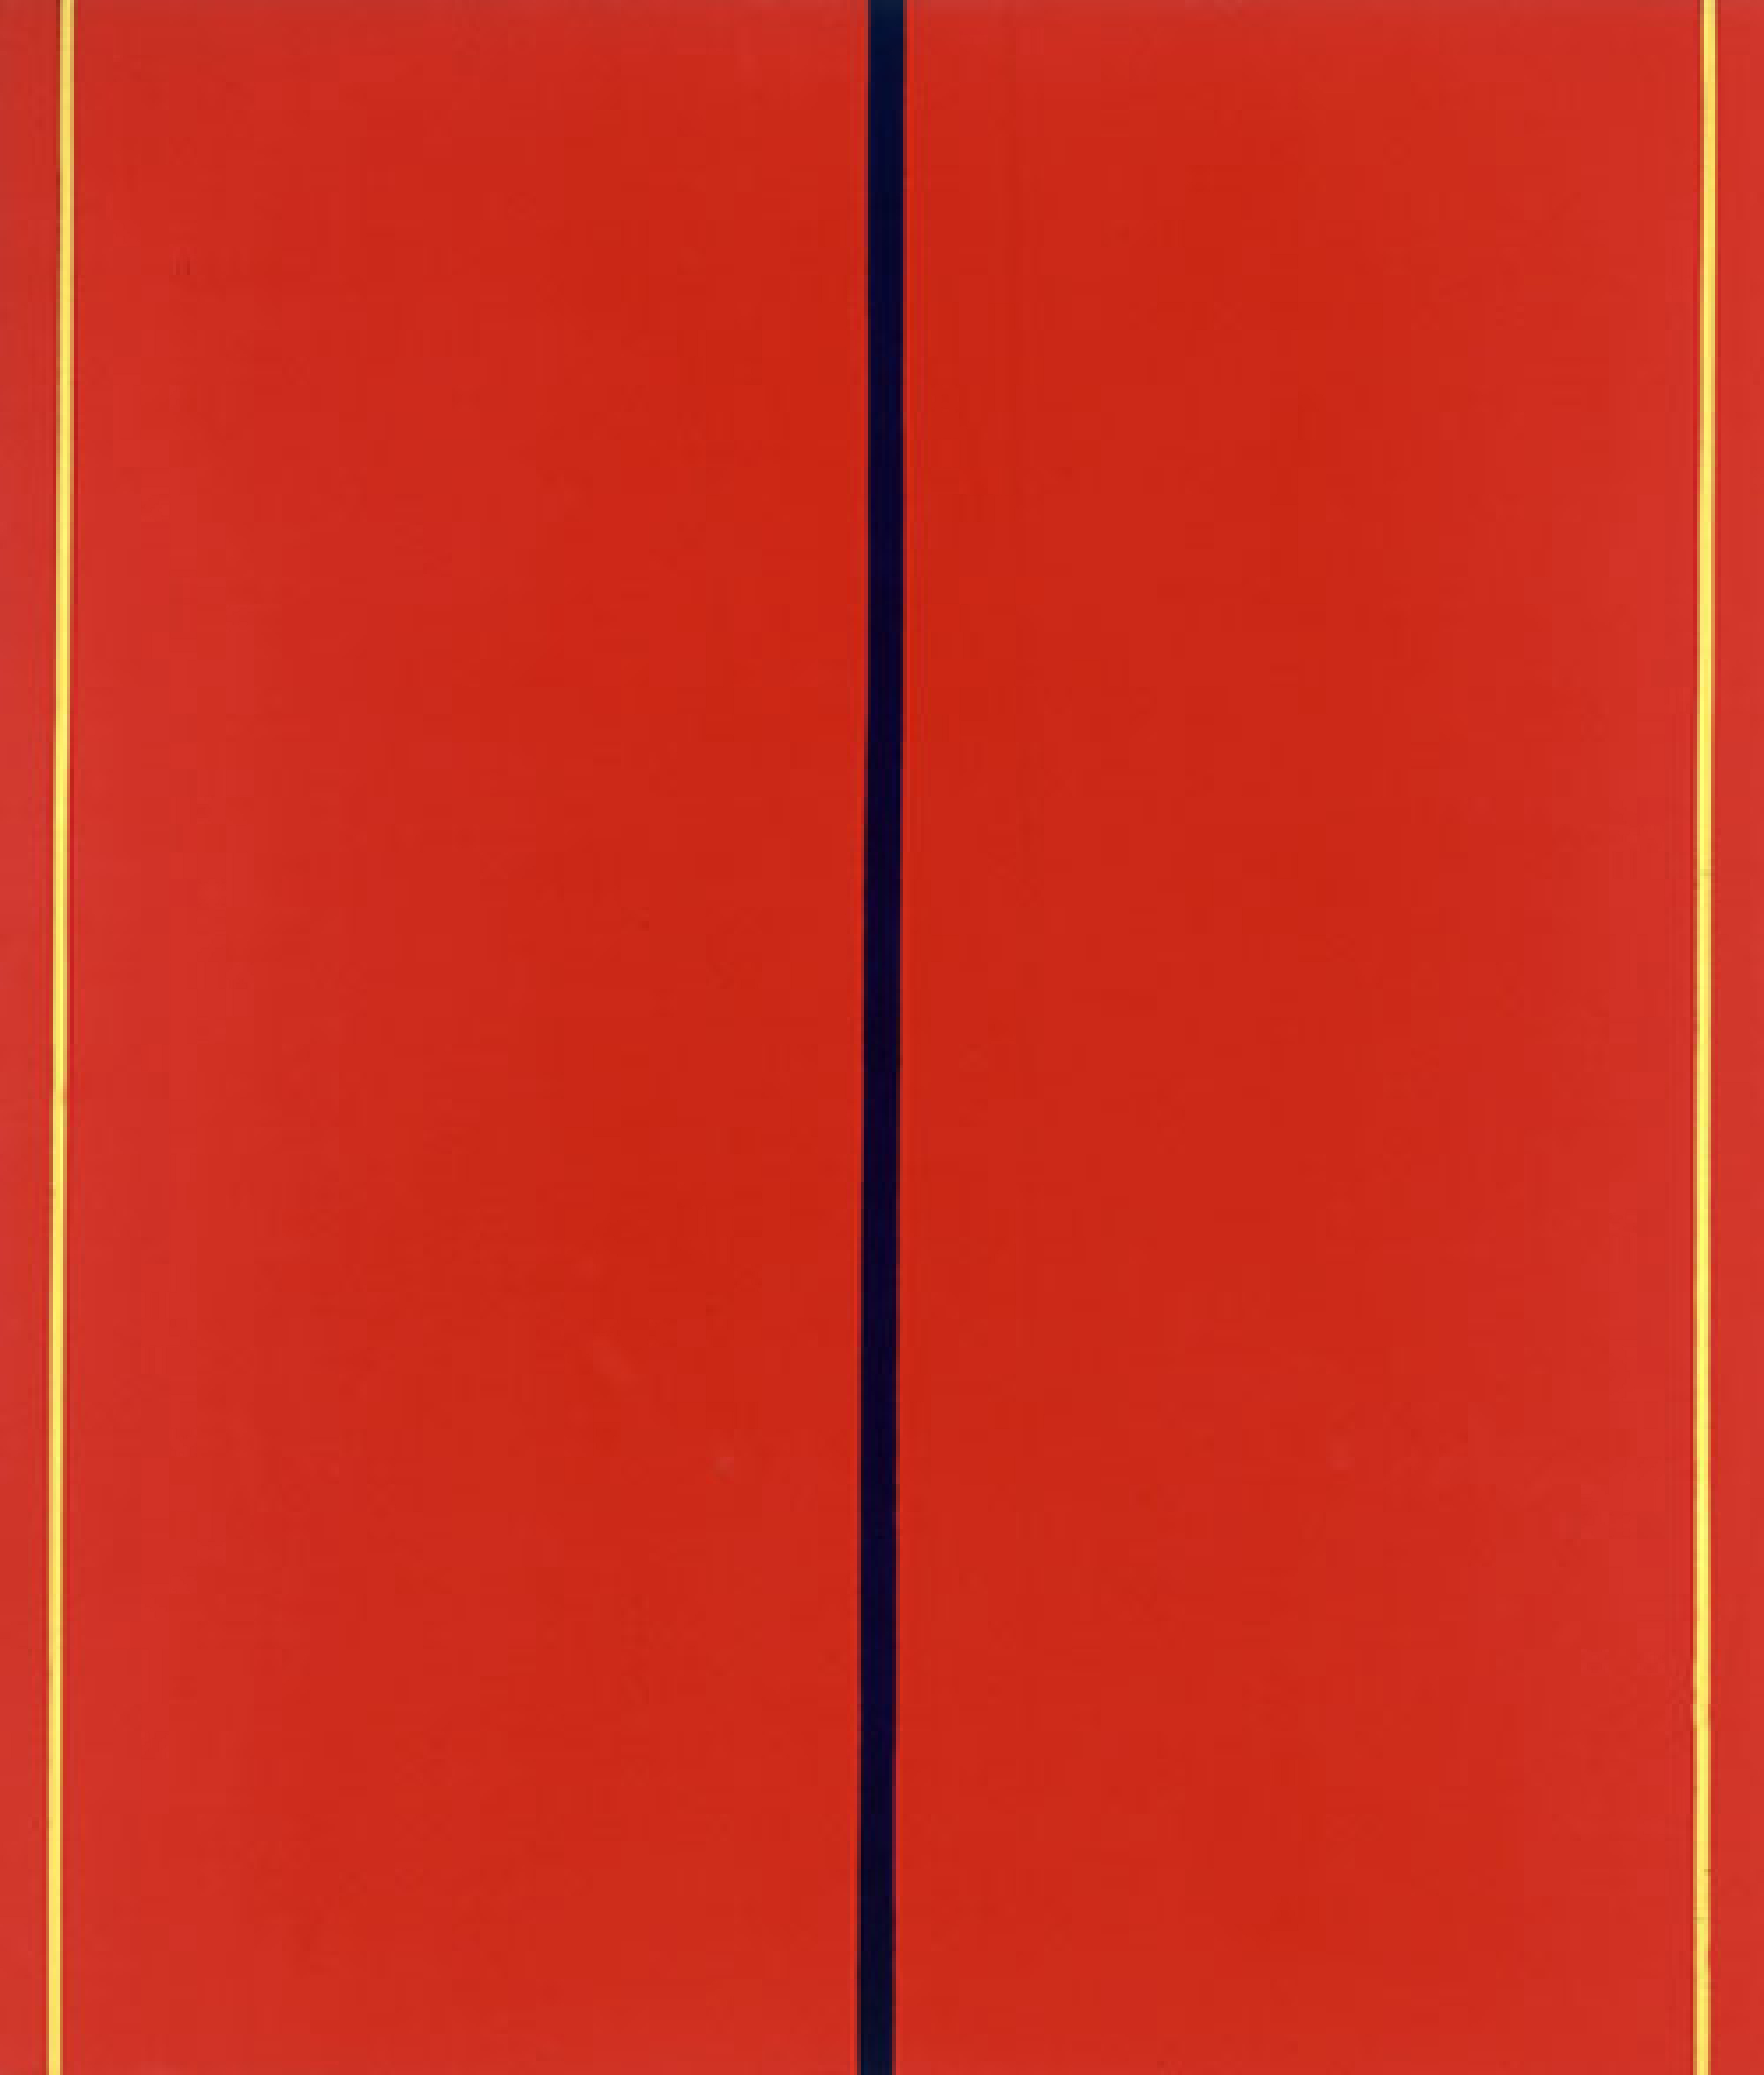 Who’s Afraid of Red, Yellow and Blue II, 1967, Oil on canvas 304.8 x 259.1 cm .6235Ko/181,6Mo